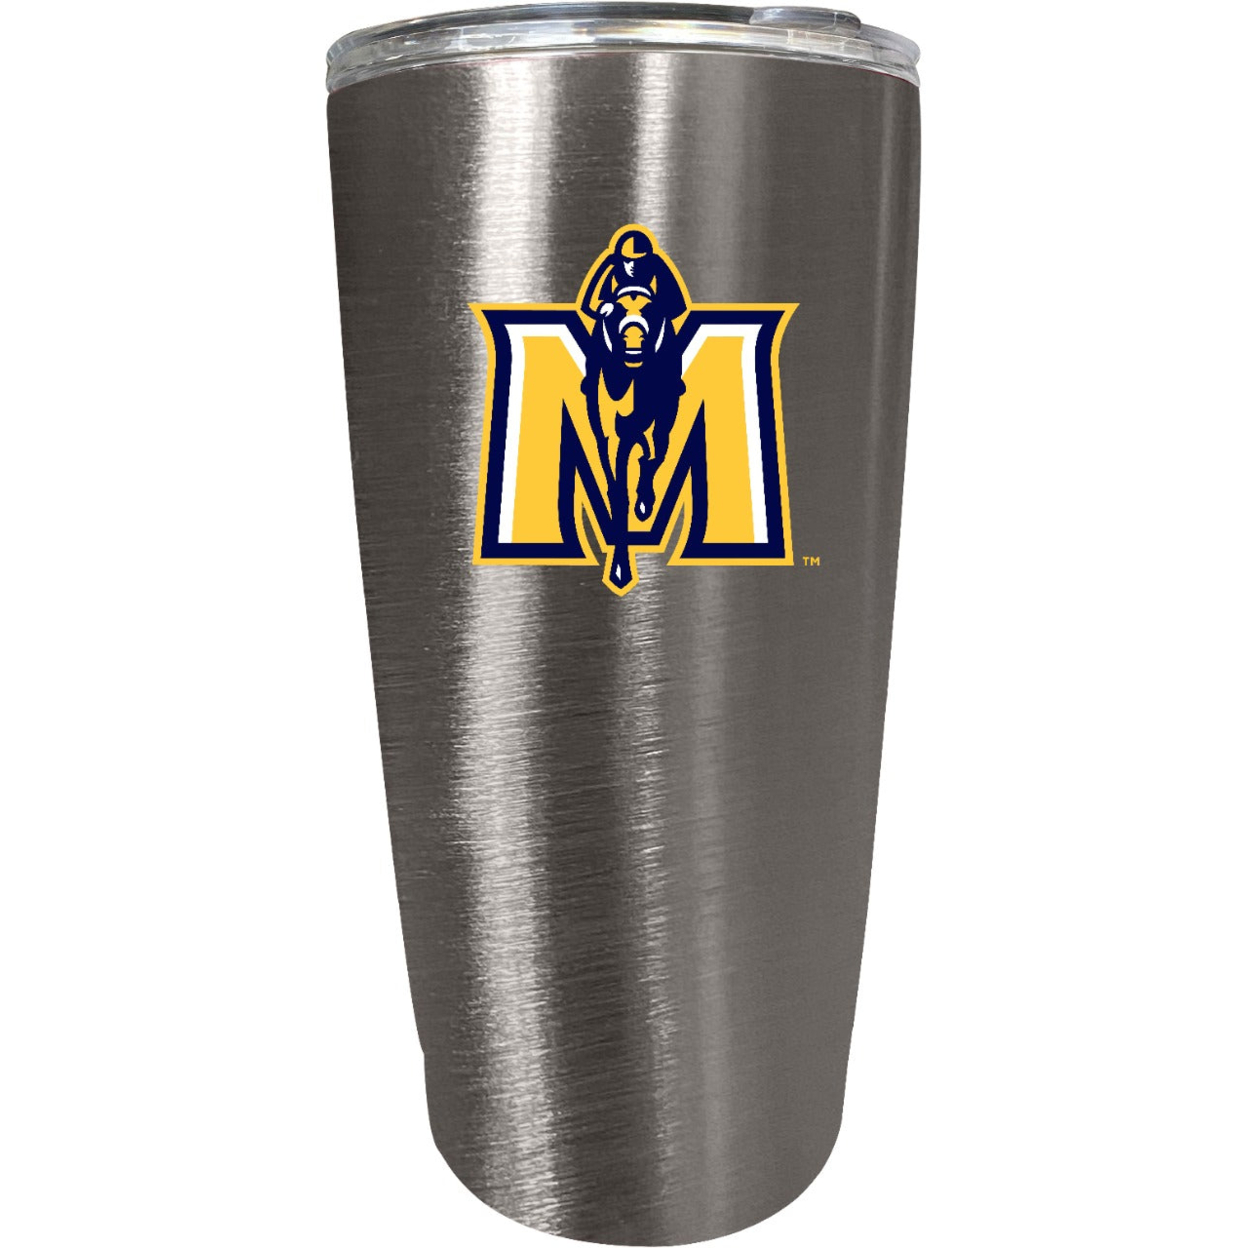 Murray State University 16 Oz Insulated Stainless Steel Tumbler Colorless